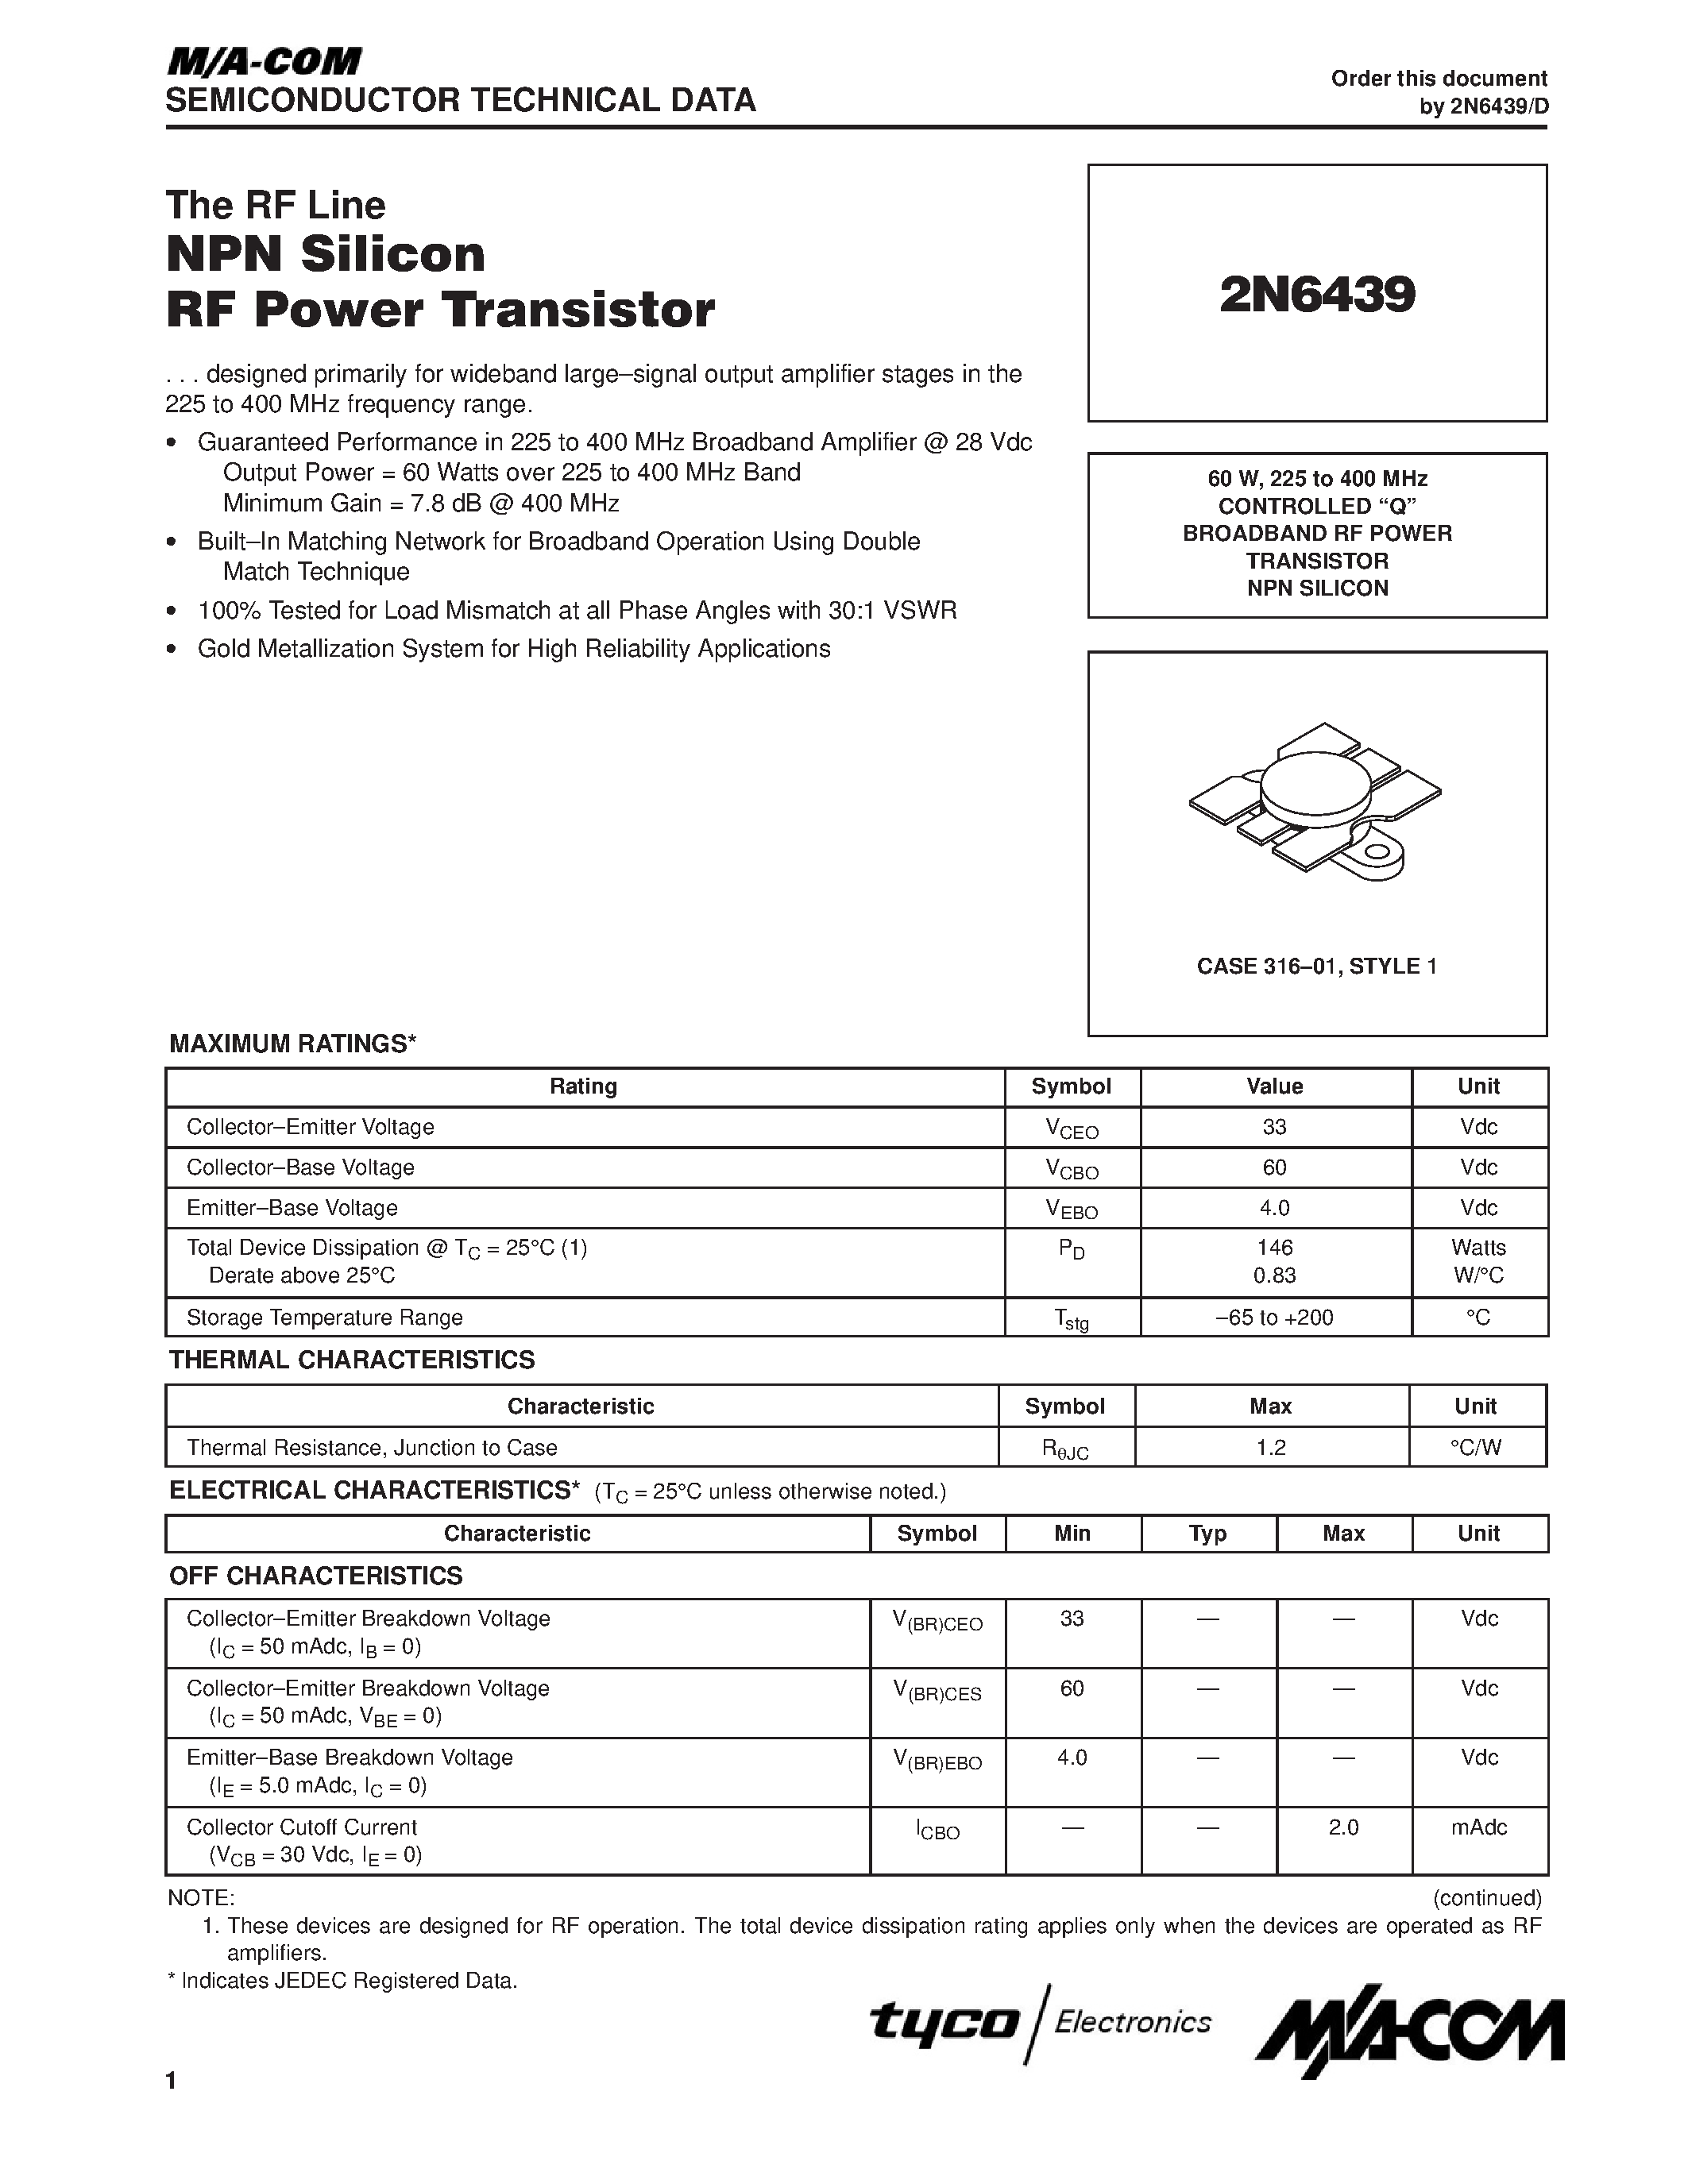 Даташит M306N0MCT - 60 W / 225 to 400 MHz CONTROLLED Q BROADBAND RF POWER TRANSISTOR NPN SILICON страница 1